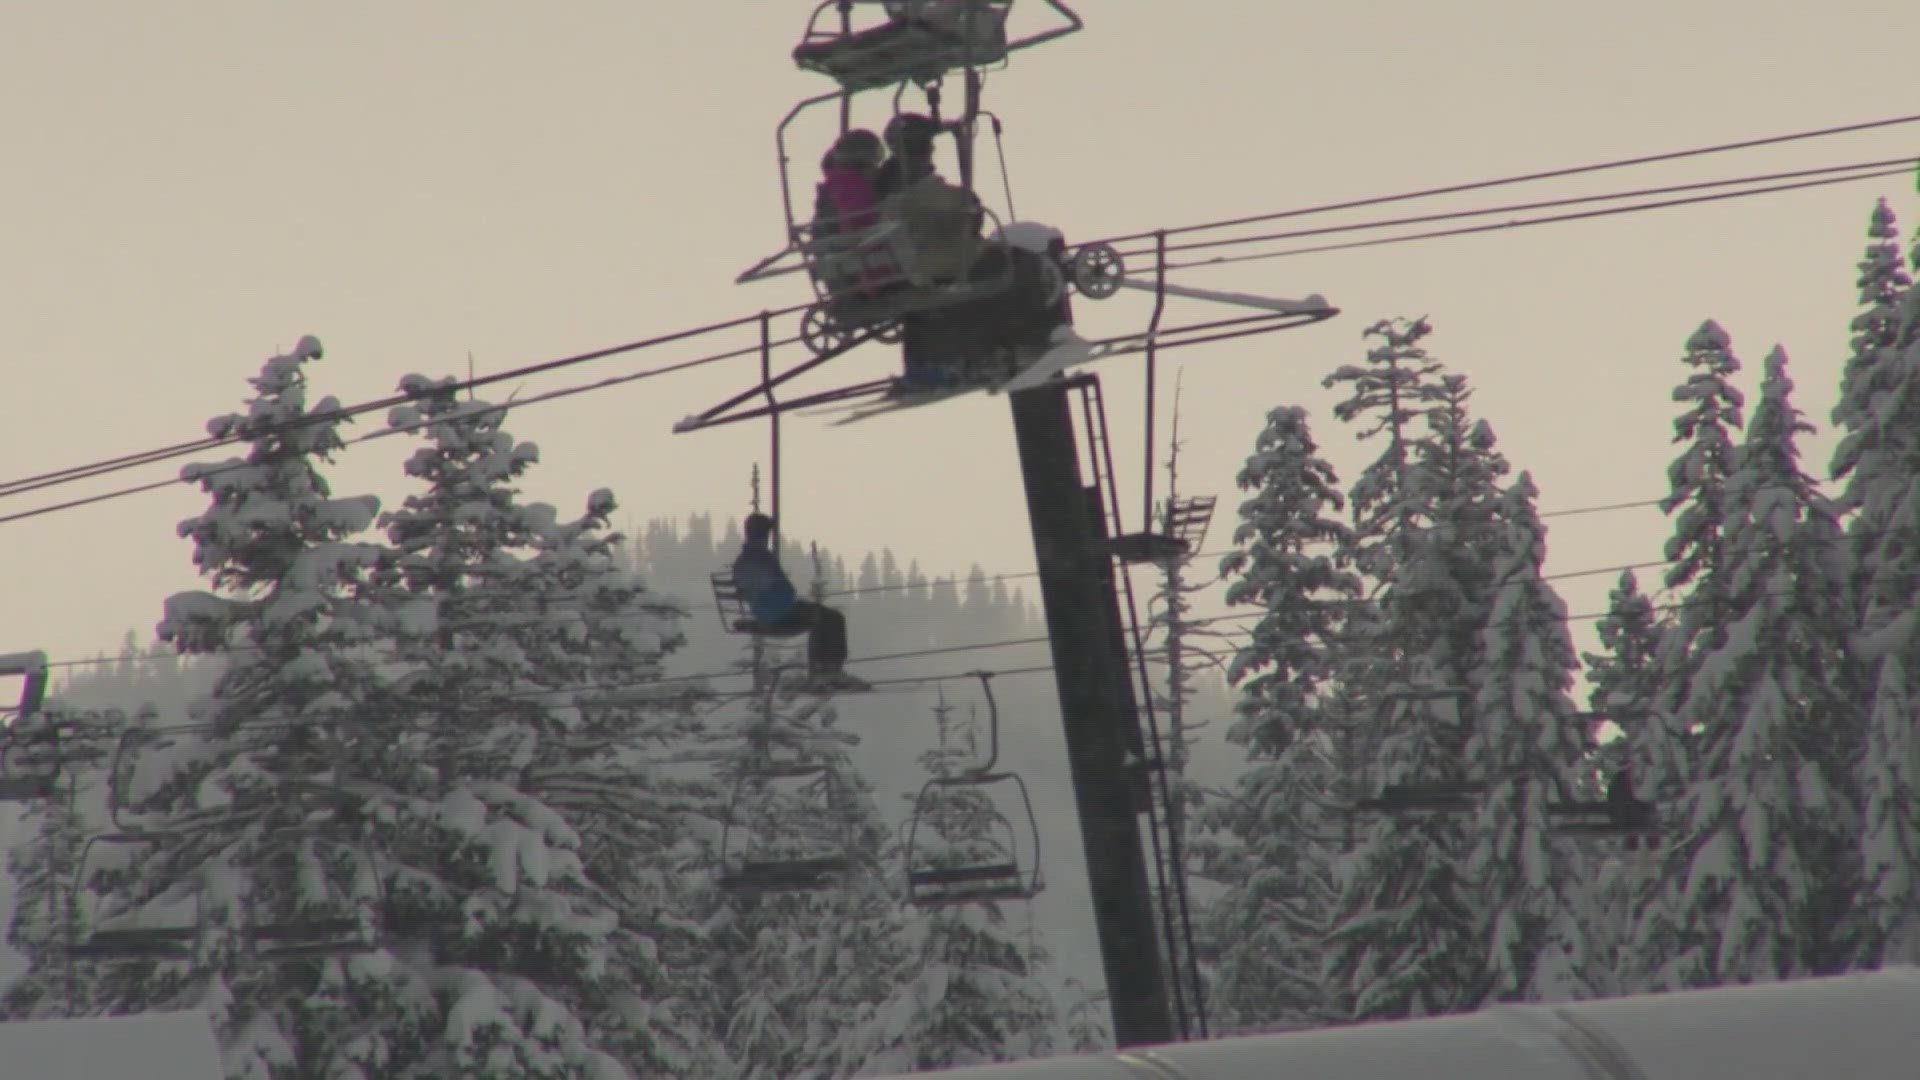 Stevens Pass Ski Resort had hoped to open for the season on December 1, but had to delay their opening due to a lack of snow on the mountain.